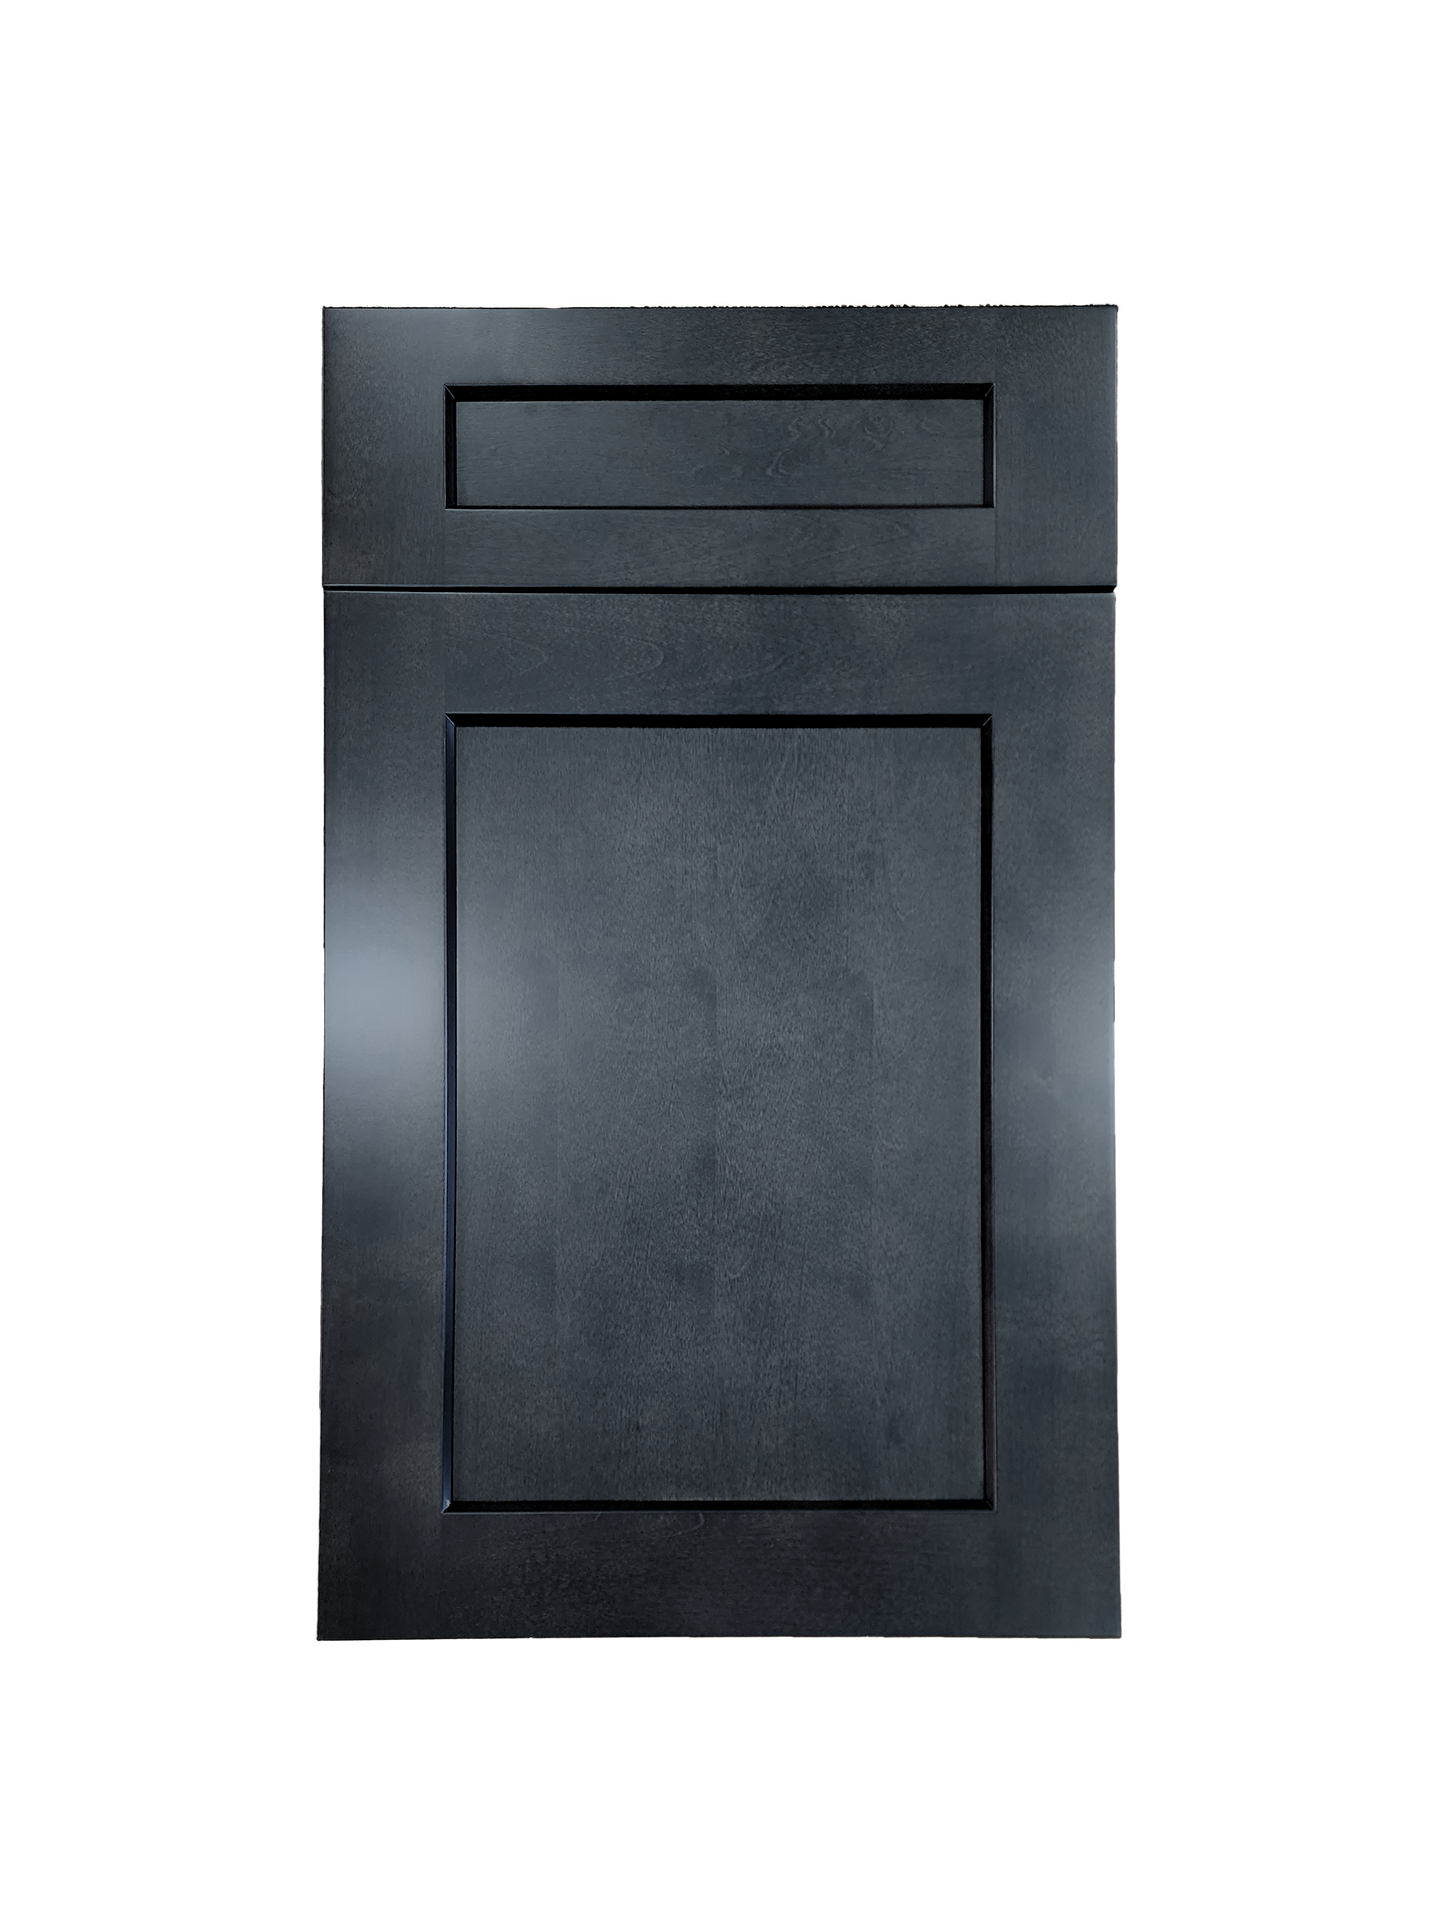 Stormy Grey Wall Cabinet 33 inches wide 12 inches deep 42 inches tall with Stormy Grey box and Stormy Grey doors